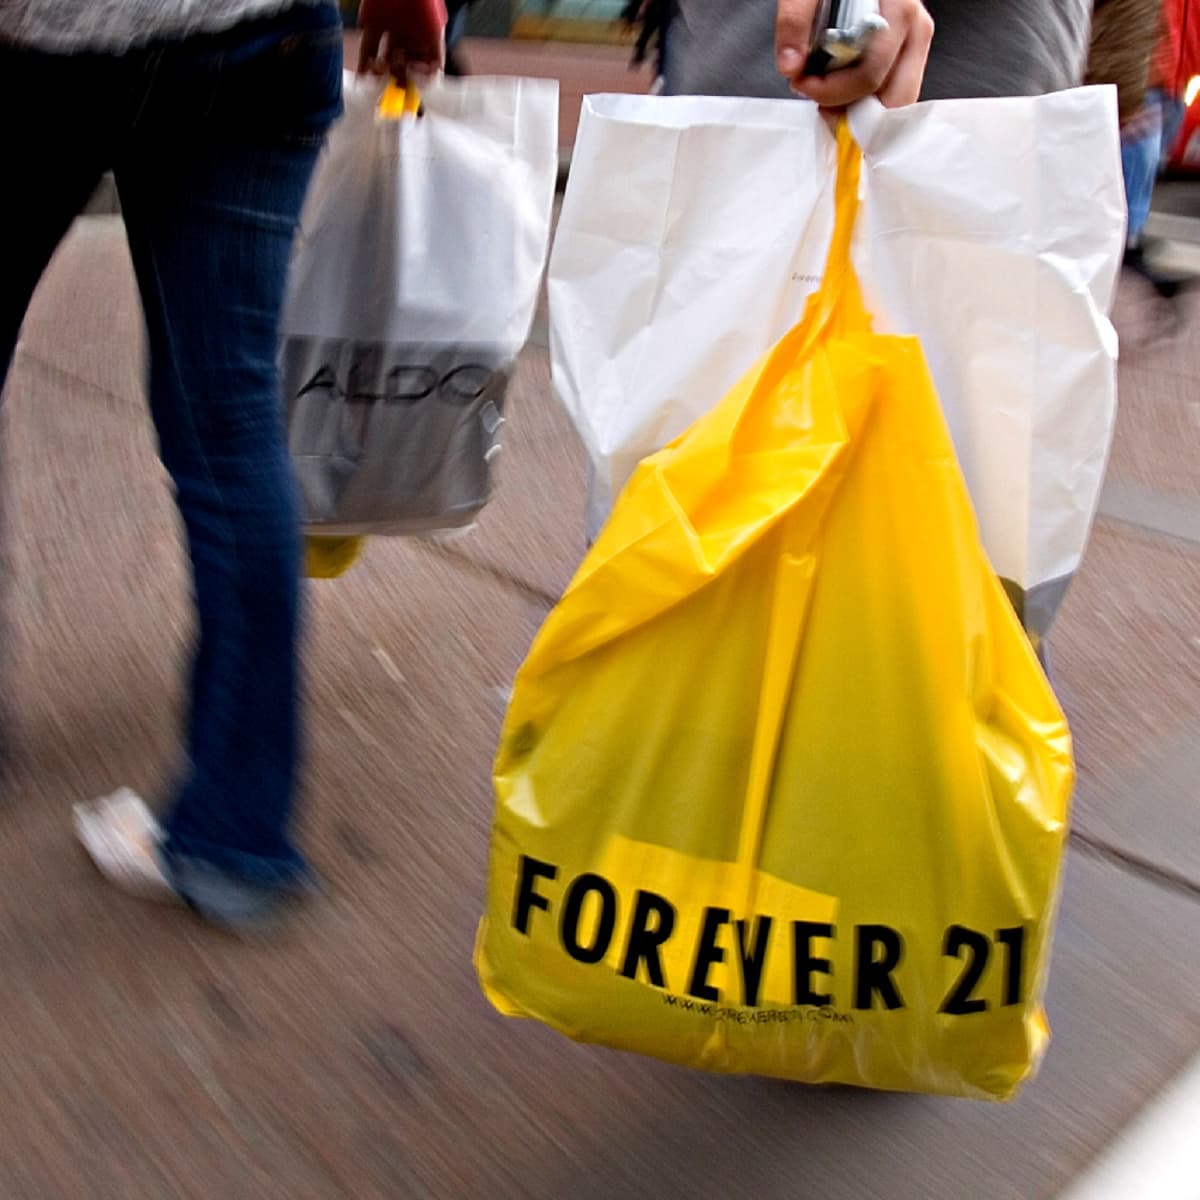 UPDATE: Here's a map of the Forever 21 stores that could close by the end  of the year